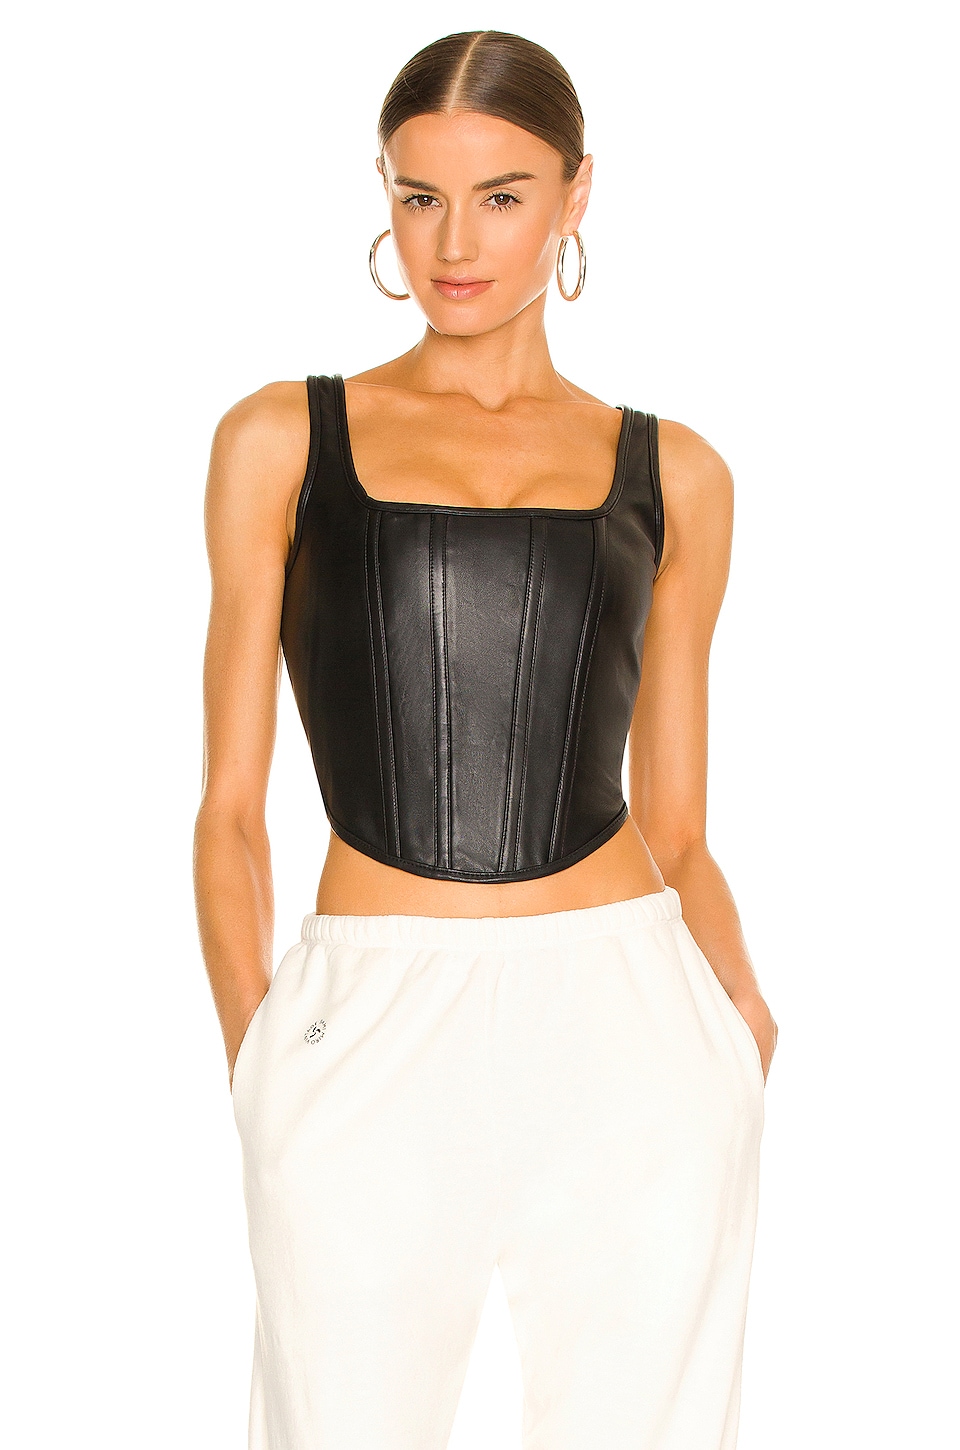 Ena Pelly Leather Bustier in Black | REVOLVE